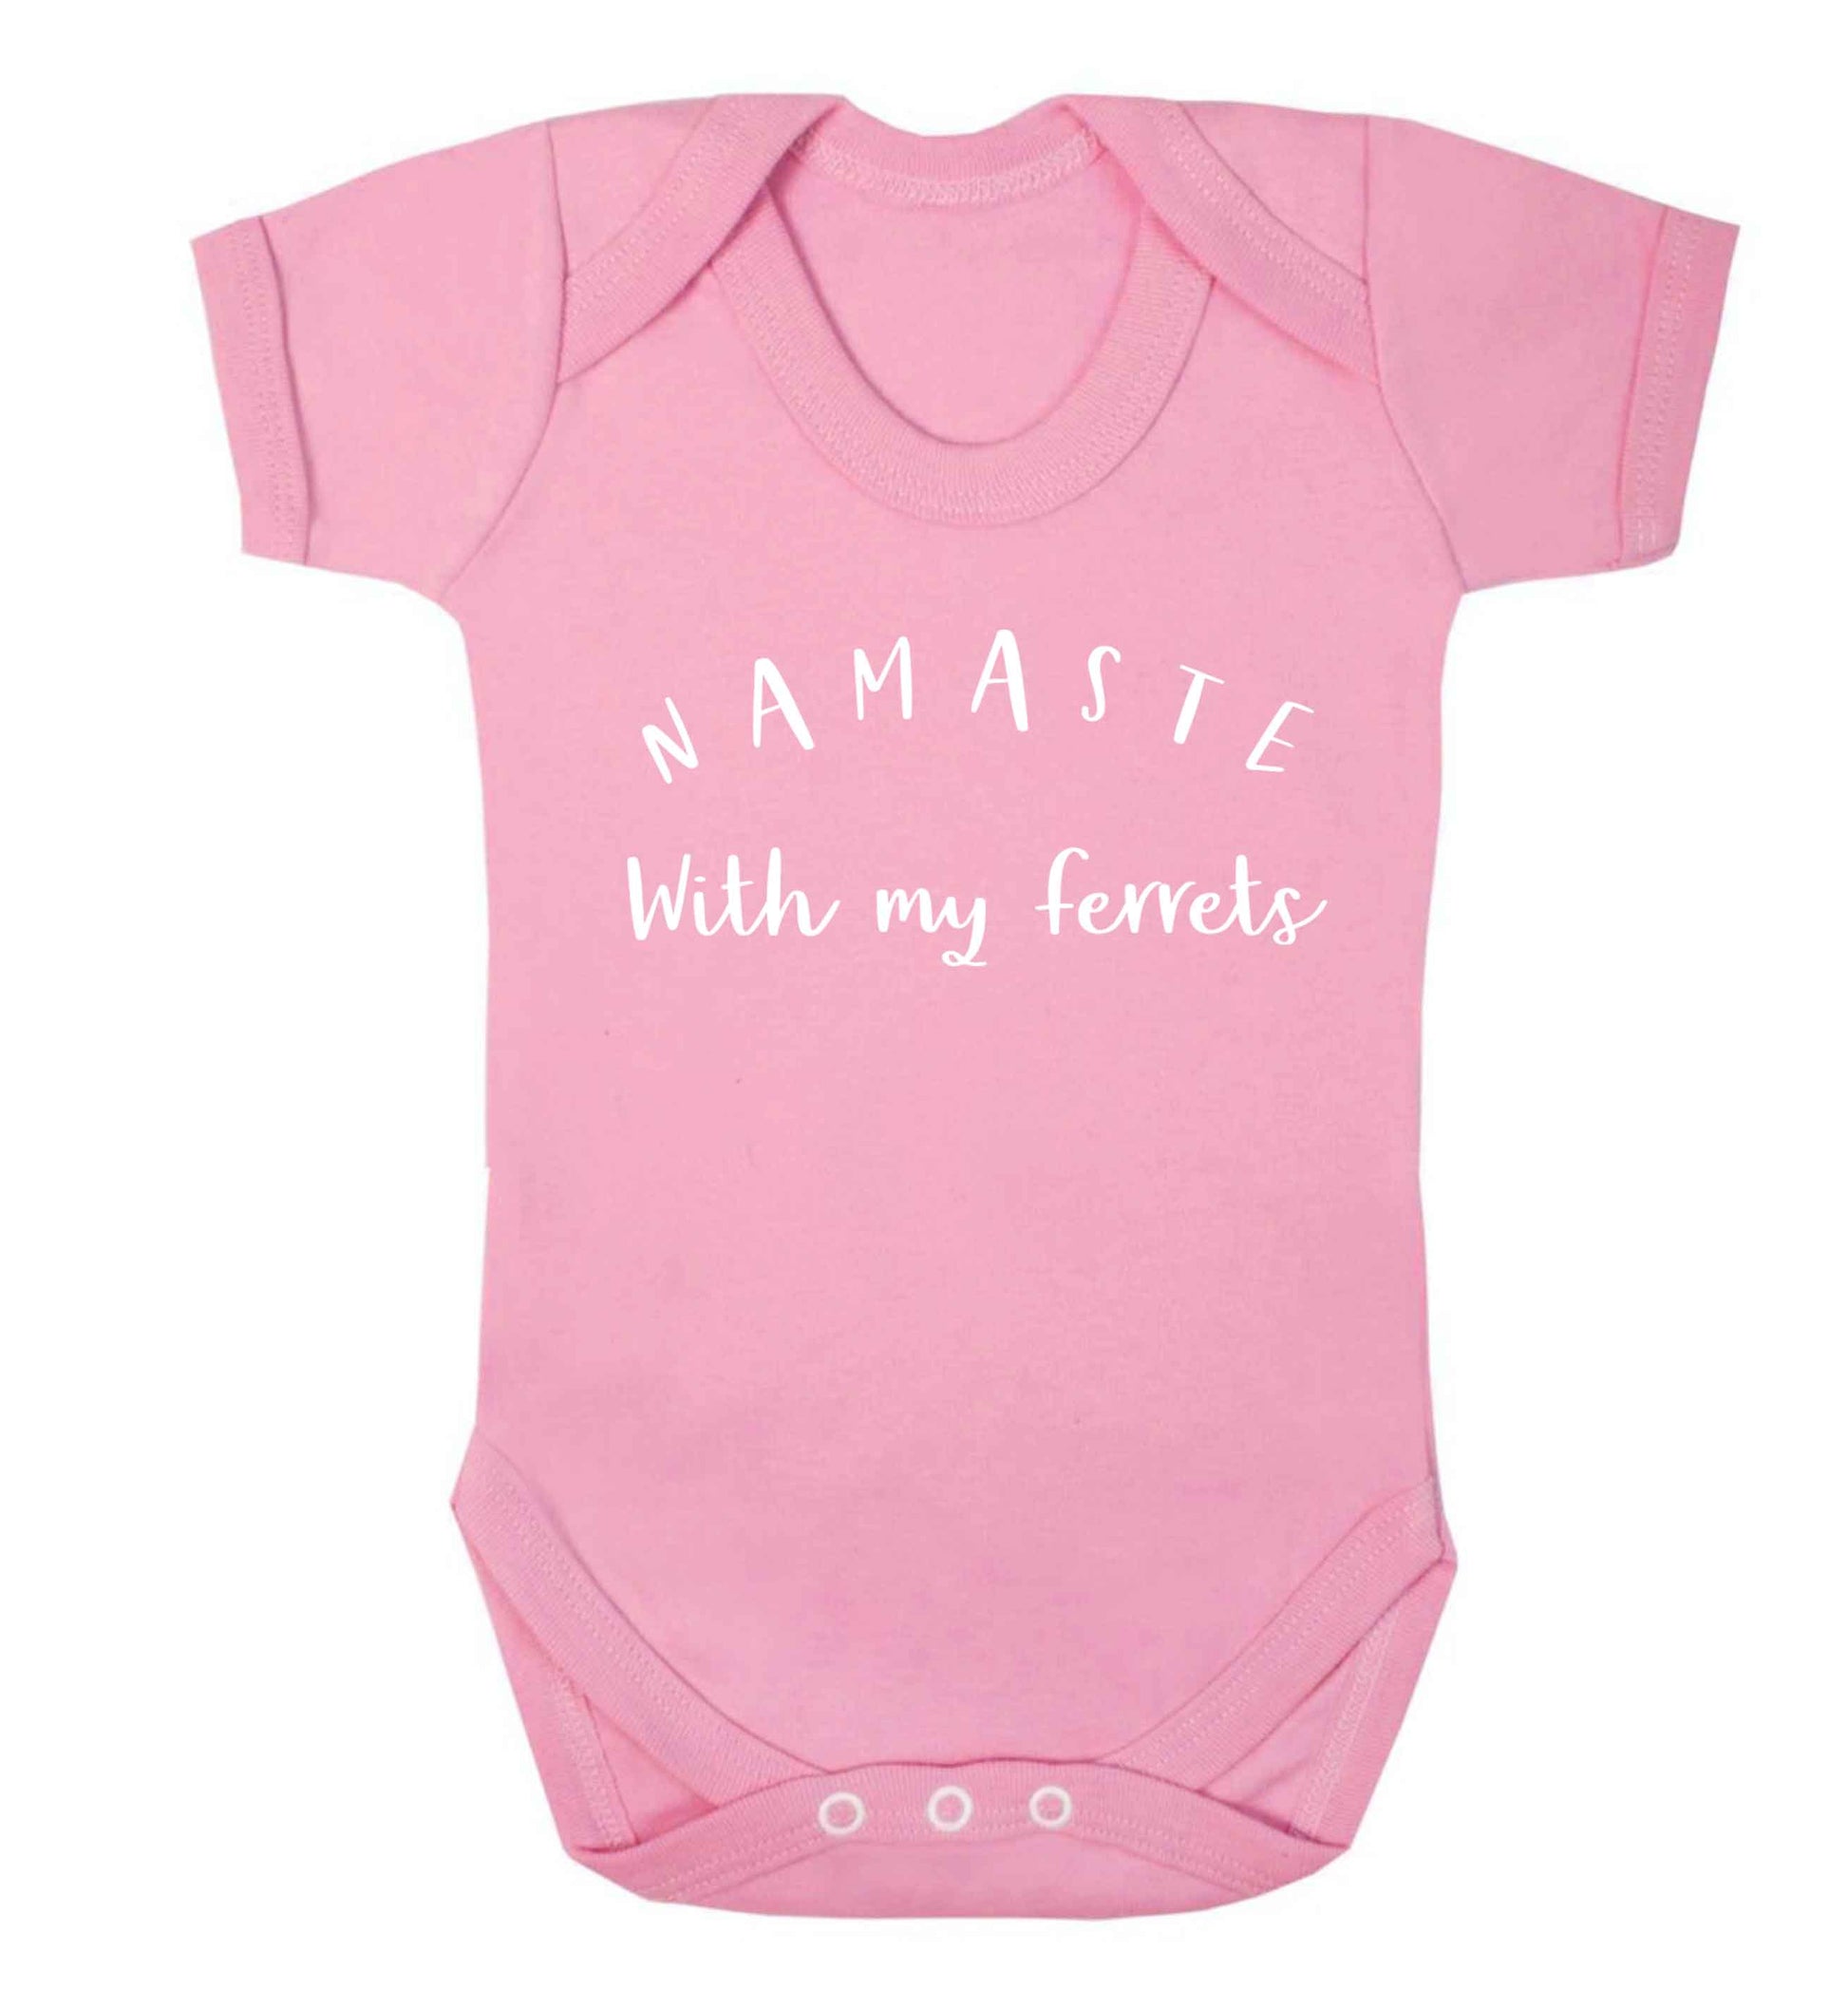 Namaste with my ferrets Baby Vest pale pink 18-24 months